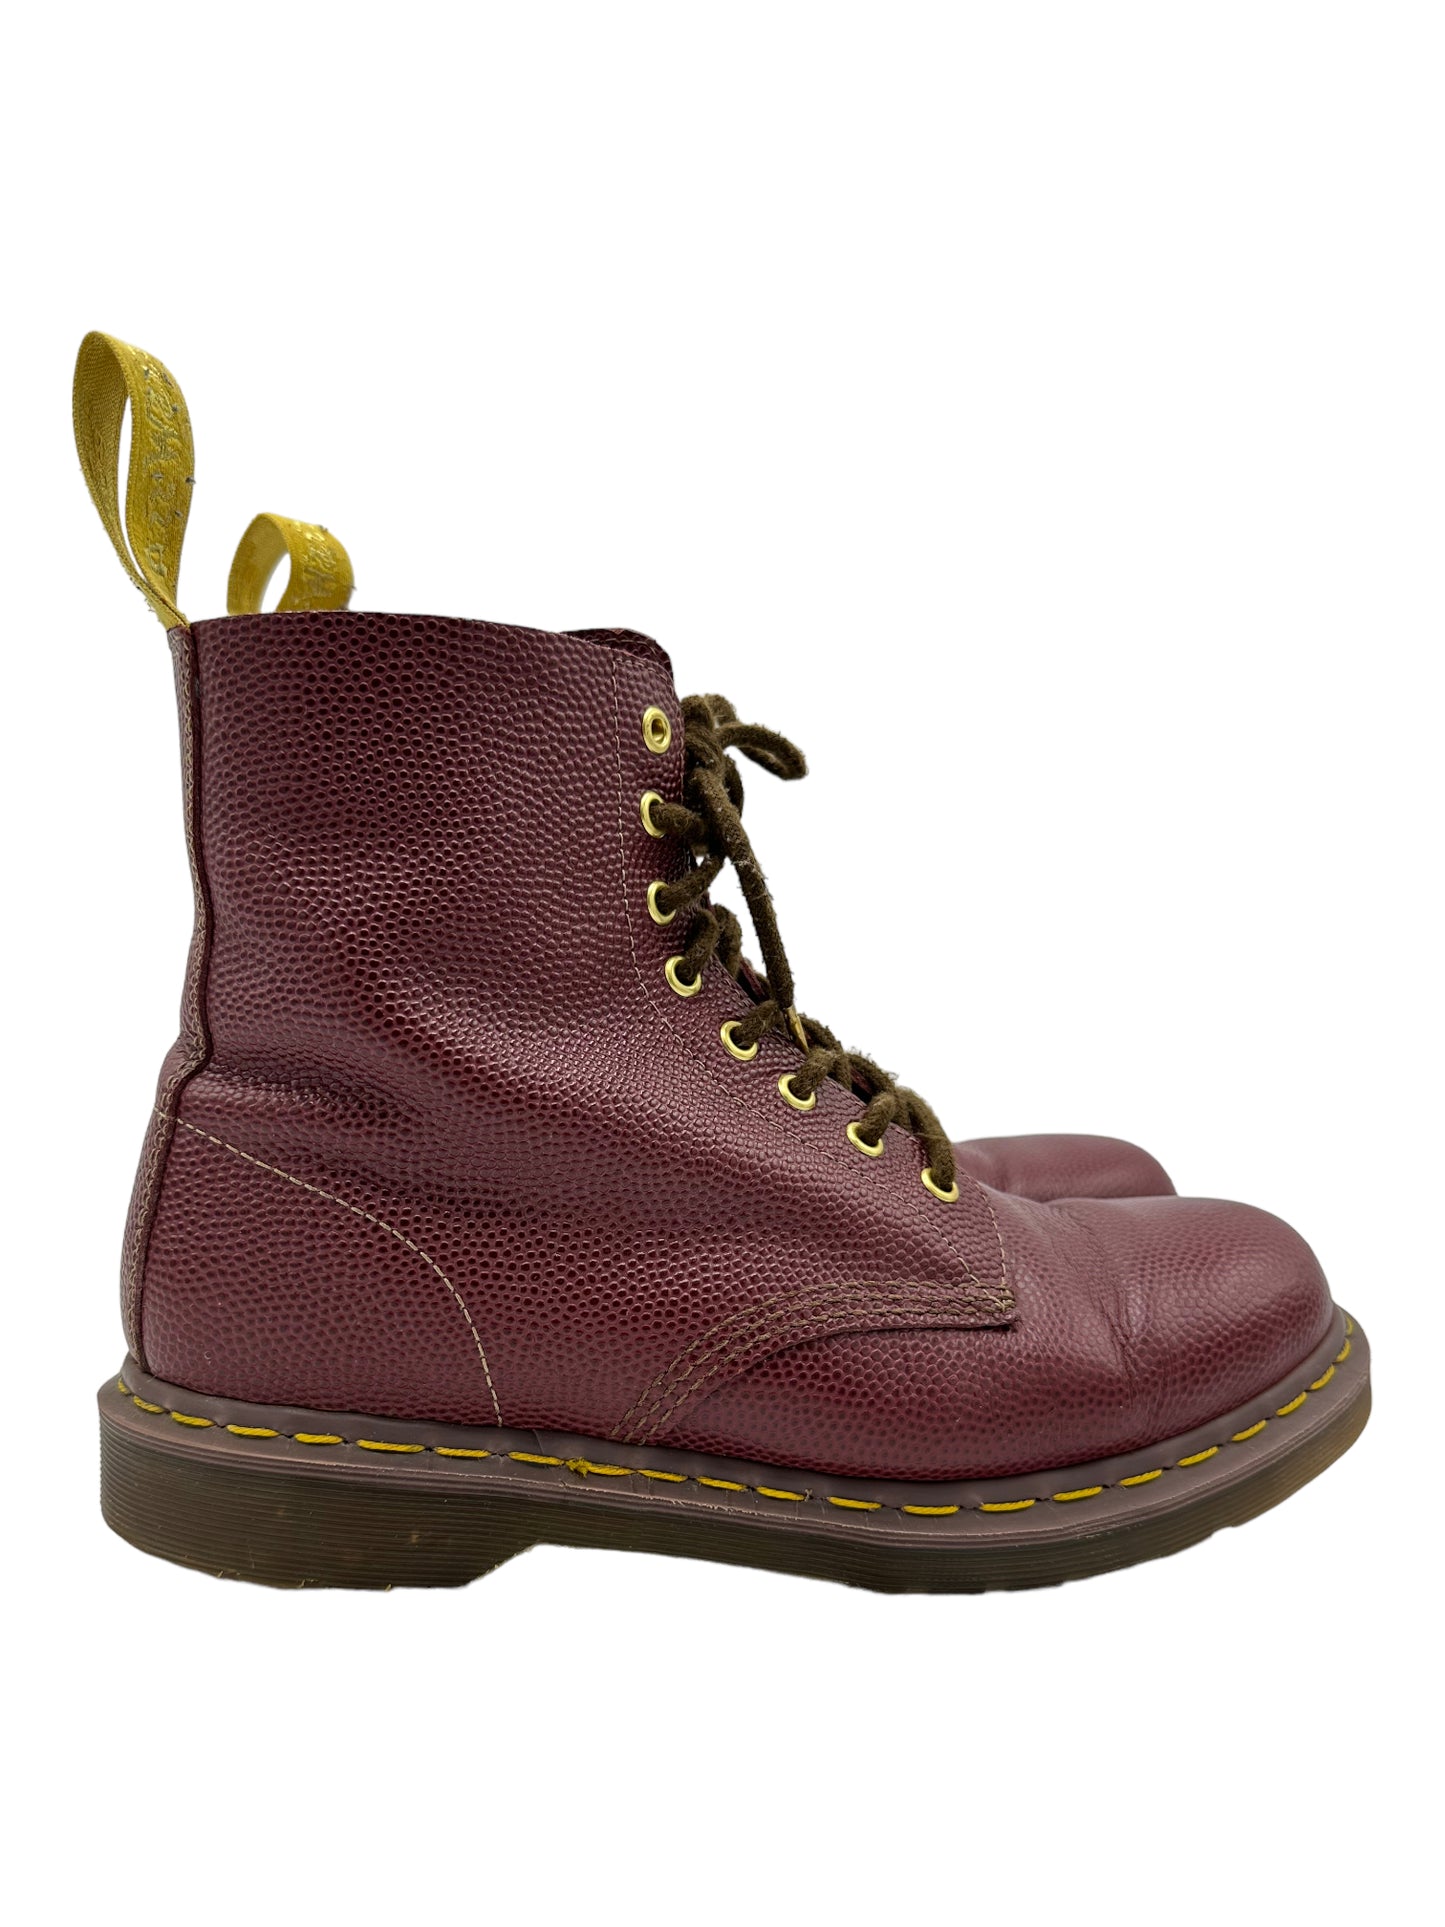 Dr. Martens 50th Anniversary 1460 Cherry Red Pebble Boots